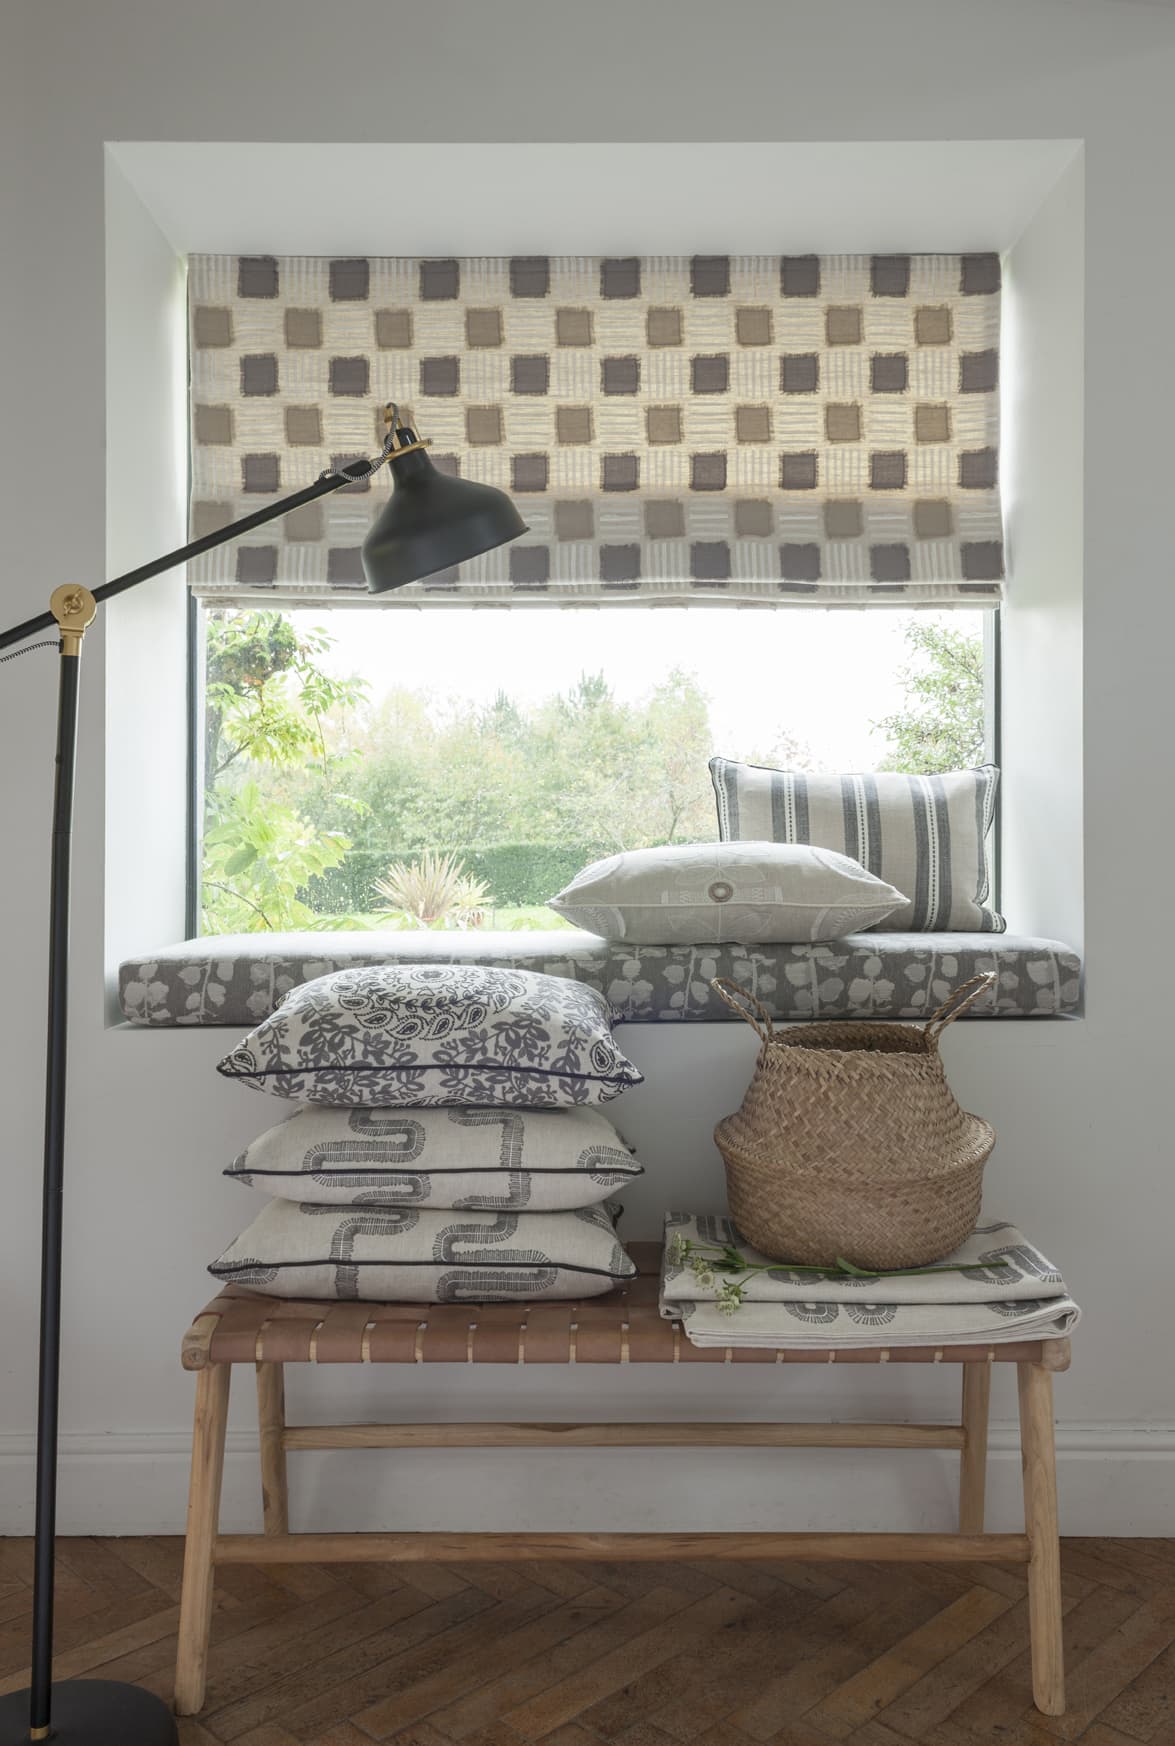 Cream and tan chequered fabric design in roman blinds - Blinds Norfolk - Norwich Sunblinds